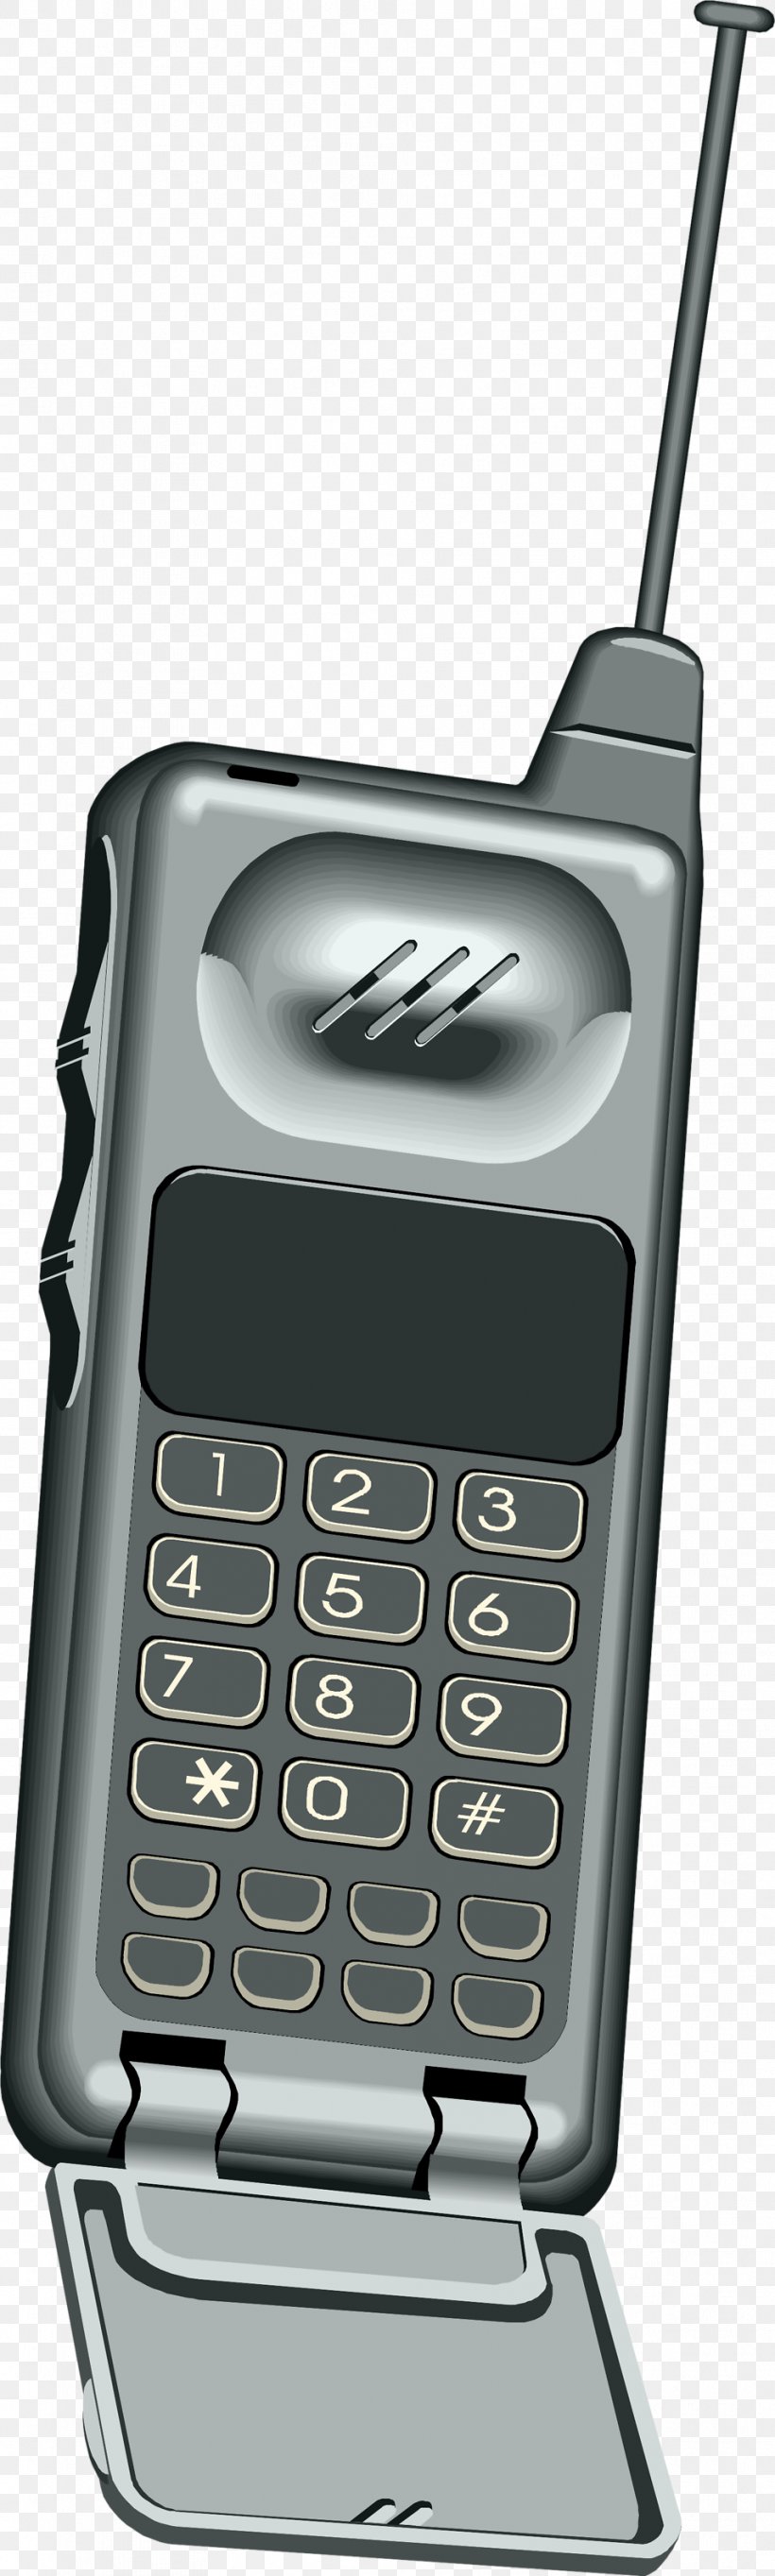 Telephone Mobile Phones Photography Clip Art, PNG, 958x3187px, Telephone, Communication, Drawing, Image File Formats, Mobile Phones Download Free